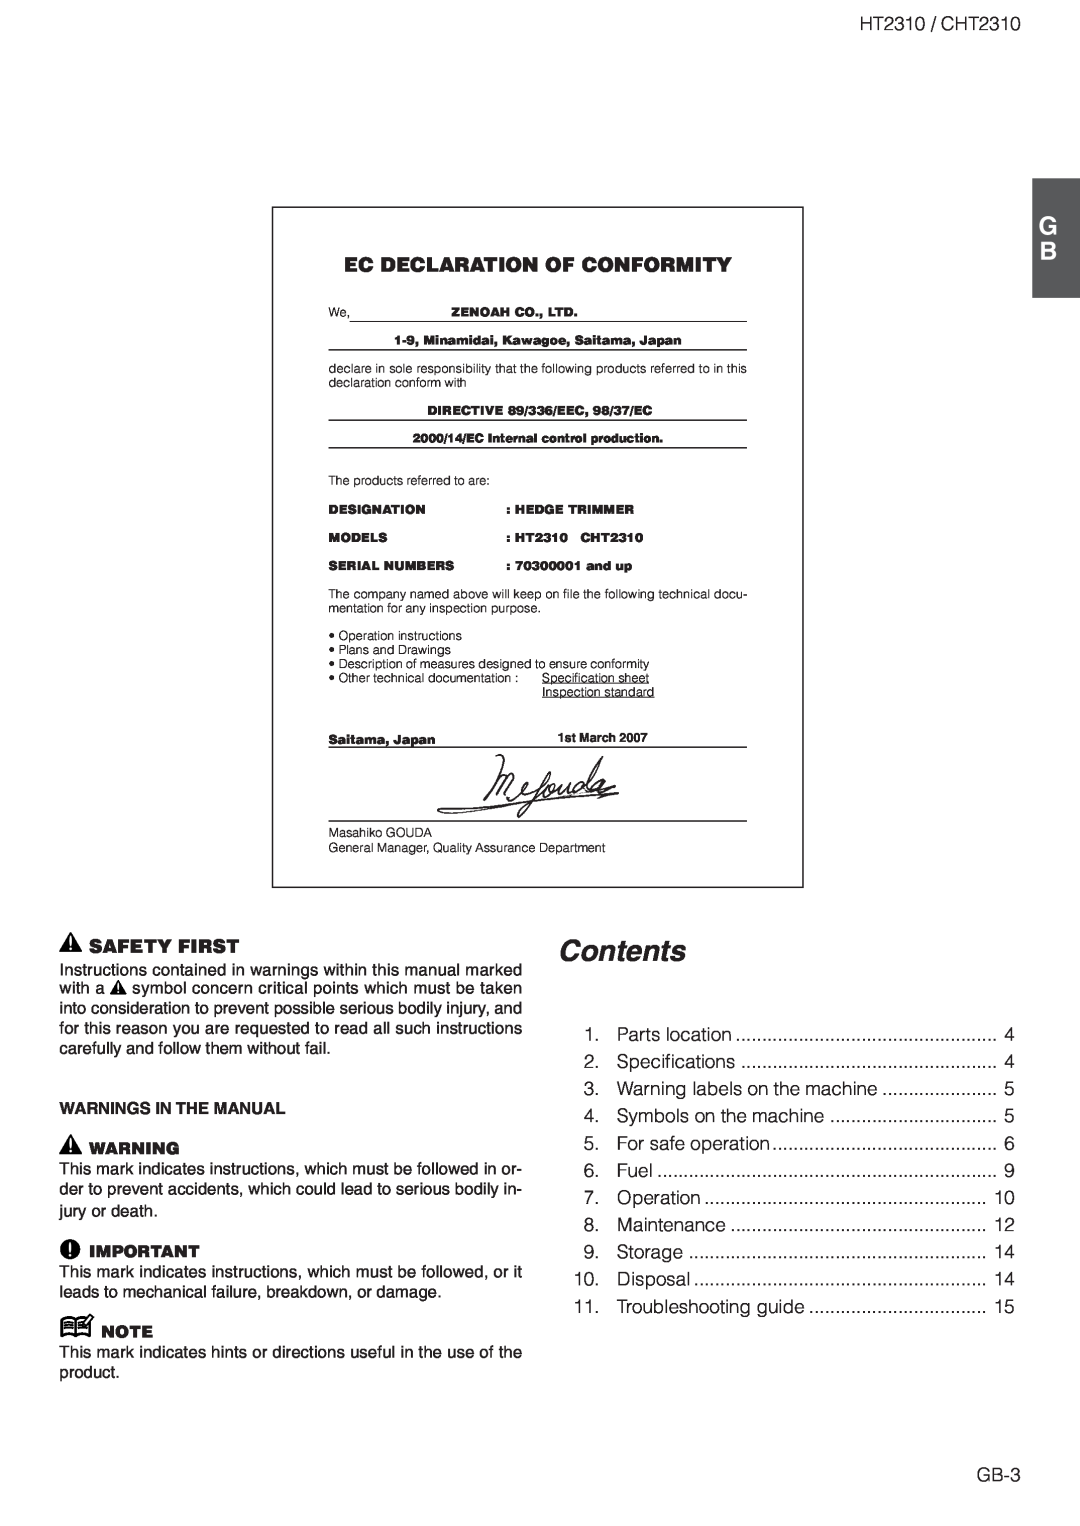 Zenoah CHT2310 owner manual Ec Declaration Of Conformity, Safety First, Contents 